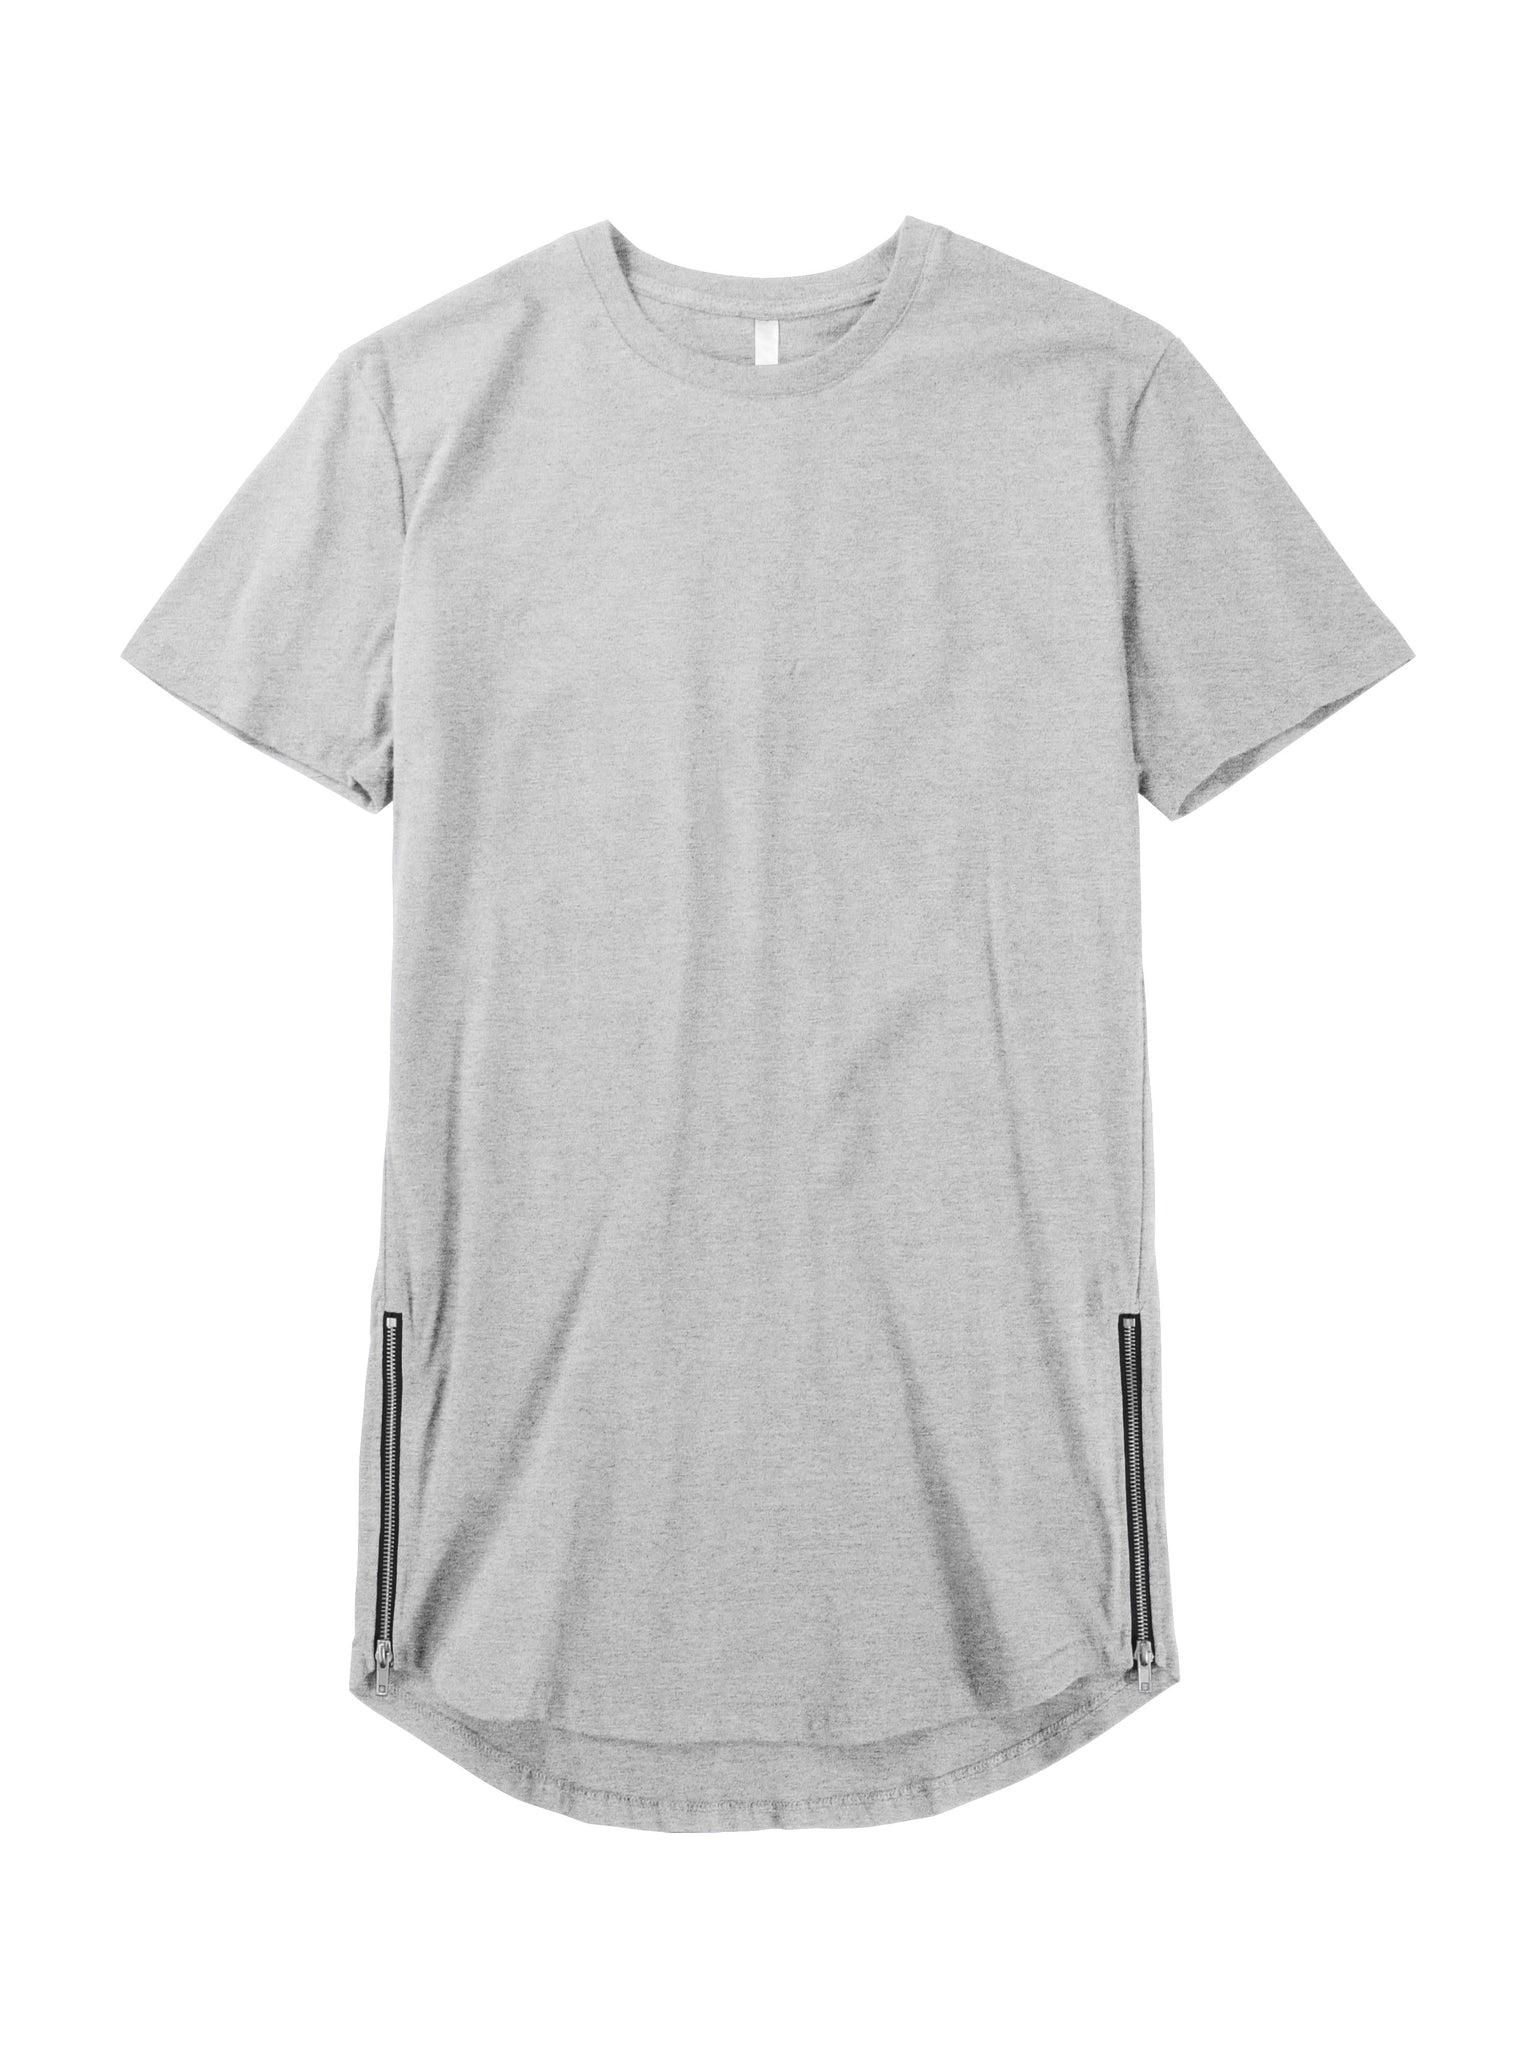 T - Longline Zipper Beyond Hat & | Hipster Premium T-Shirt Side Shirts Tank Mens and with Tops